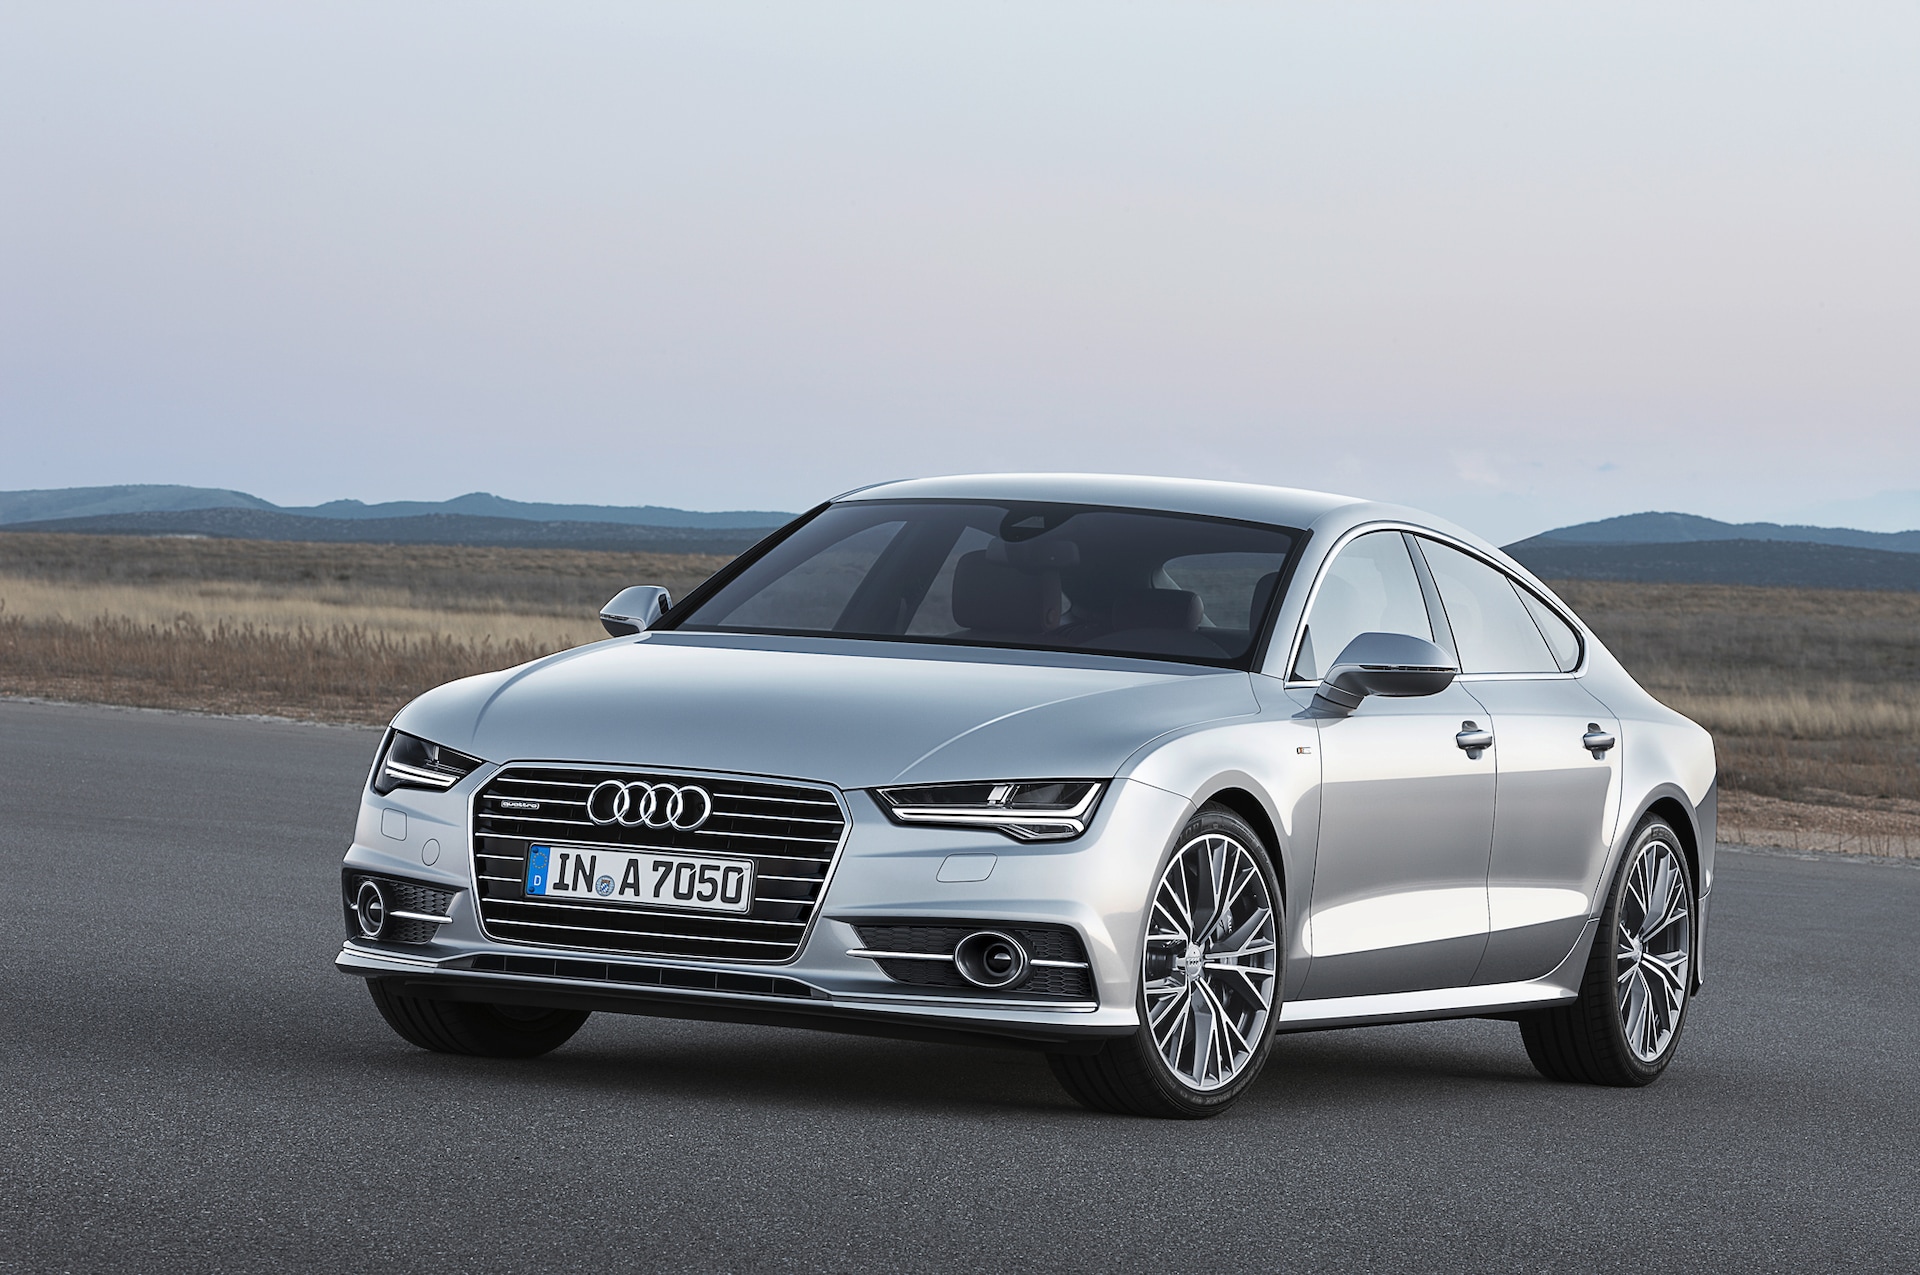 Facelifted 2015 Audi A7 Revealed for Europe